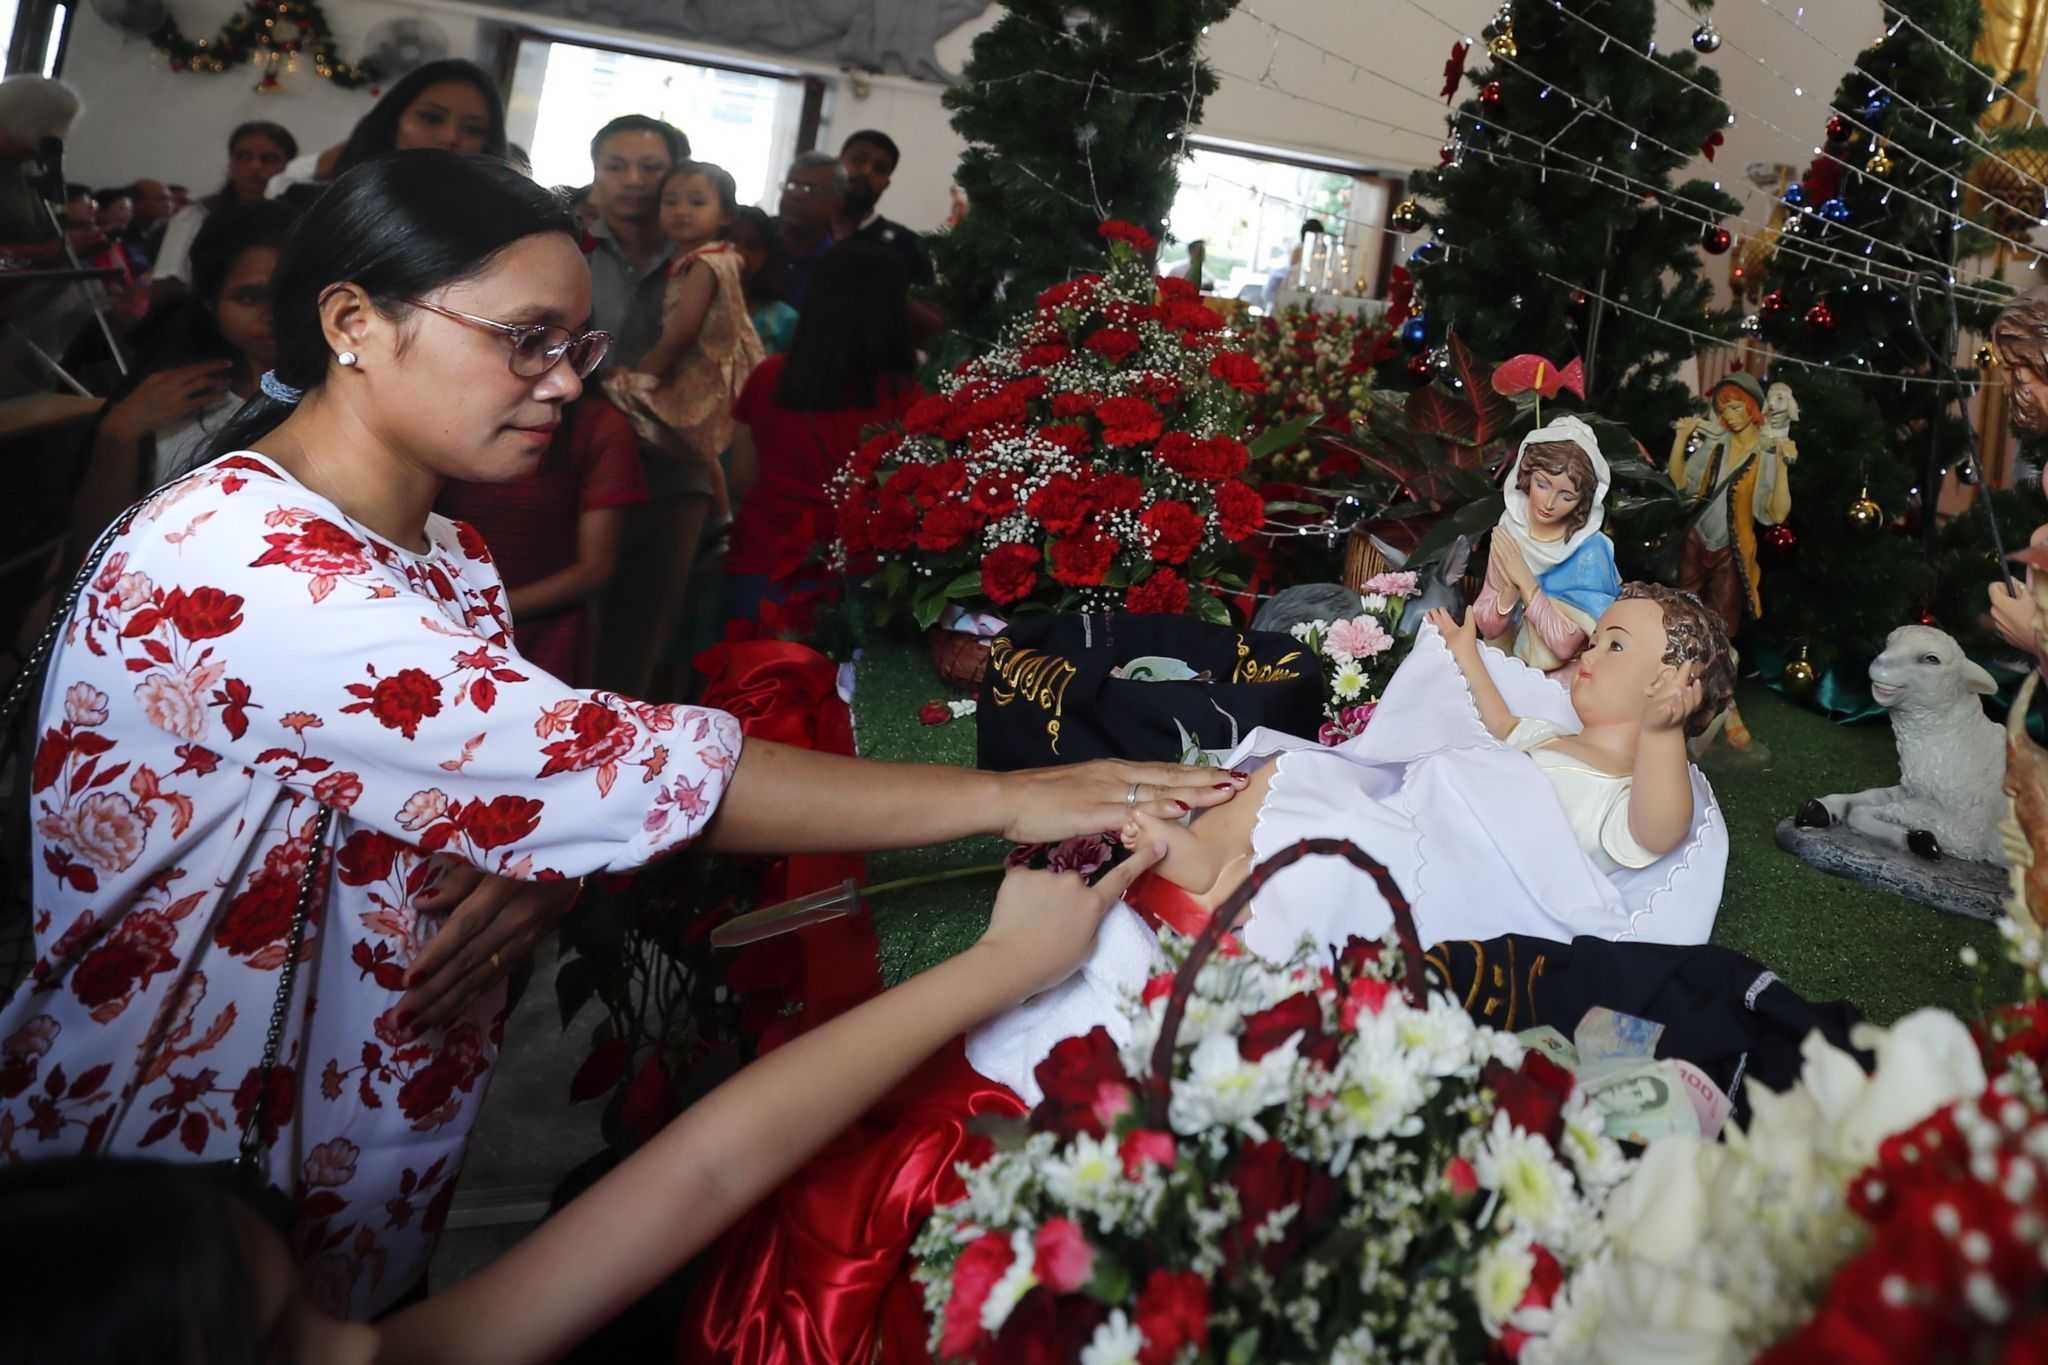 Thai and foreign Catholic church goers touch the baby Jesus doll in the Nativity scene during Christmas Day Mass at a church in Bangkok